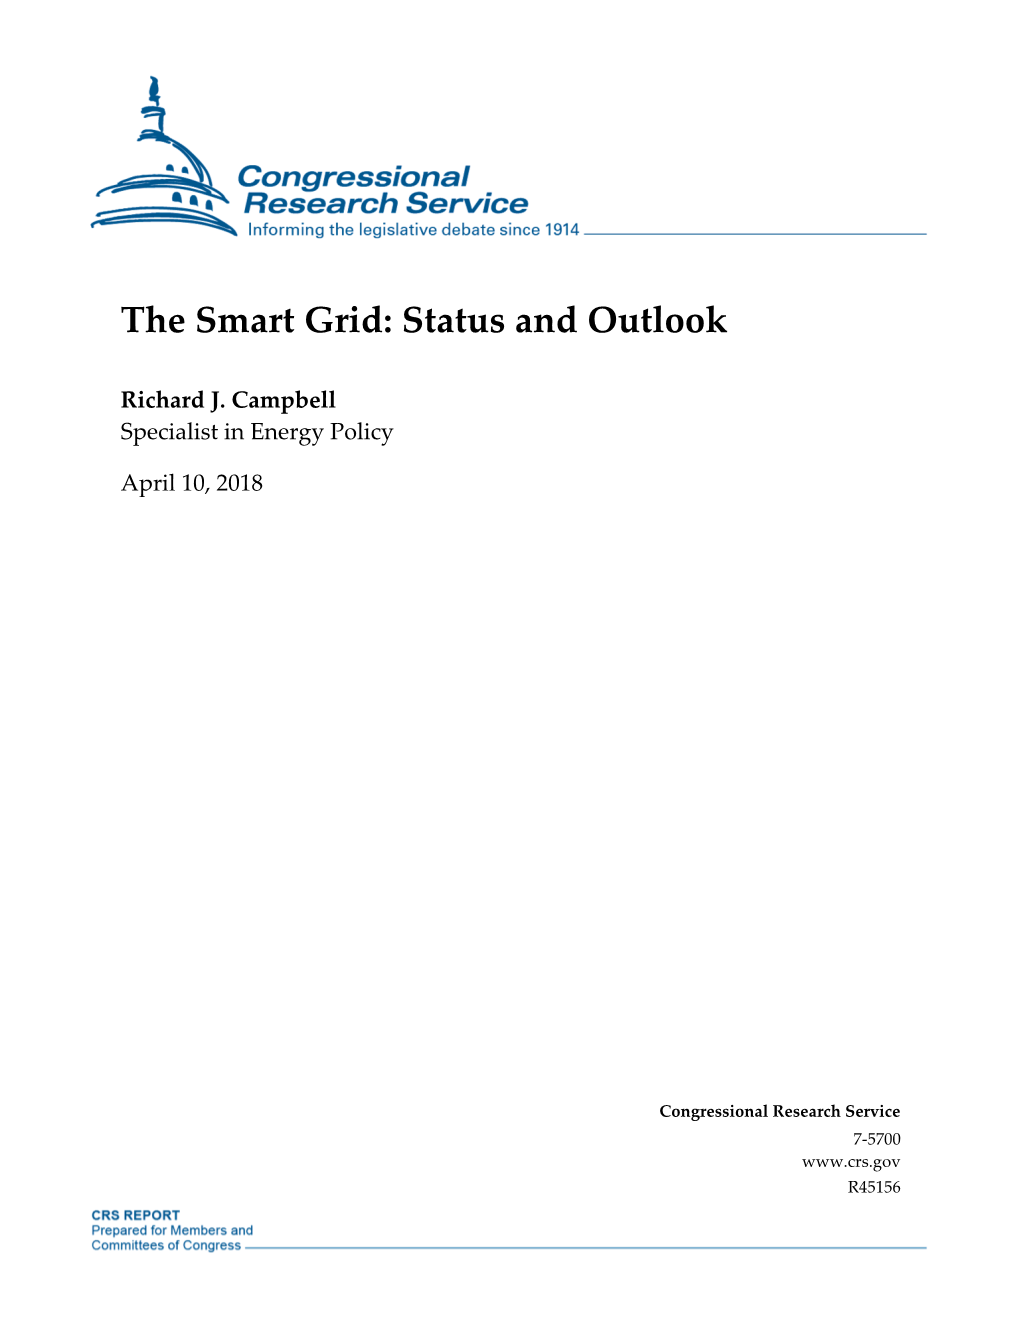 The Smart Grid: Status and Outlook